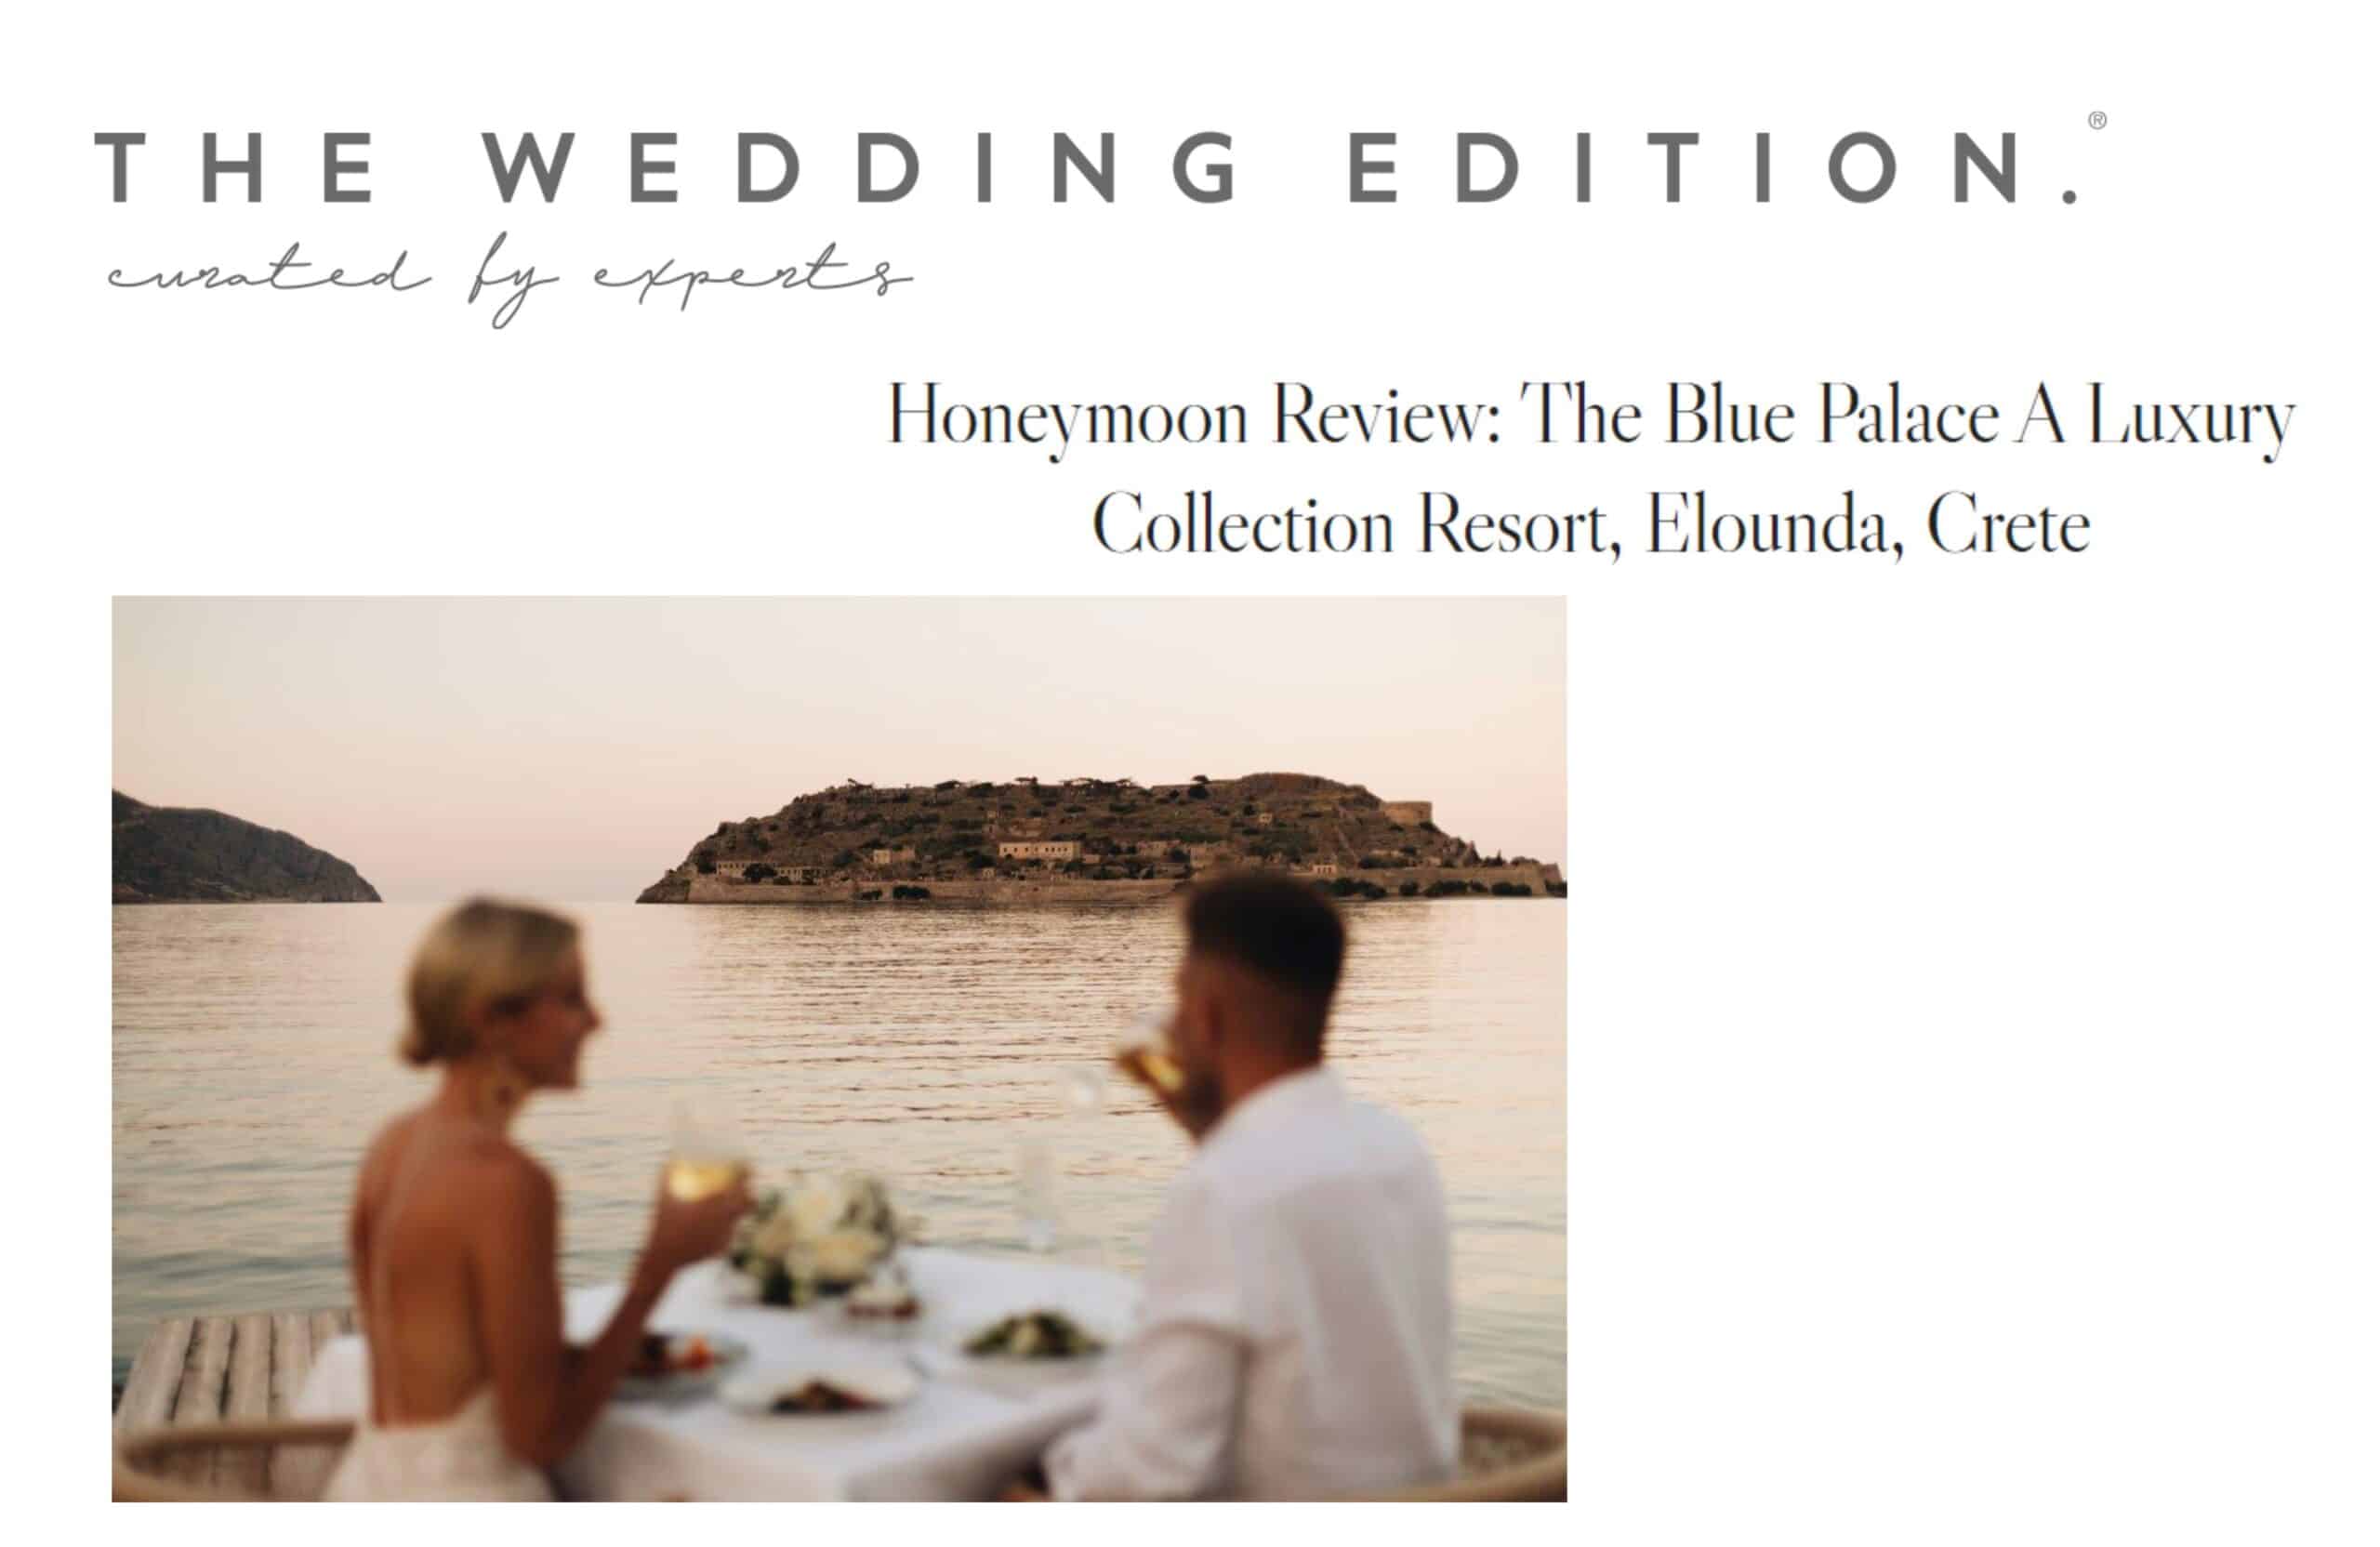 Honeymoon Review: The Blue Palace A Luxury Collection Resort, Elounda, Crete By Alexandra Dudley In The Wedding Edition